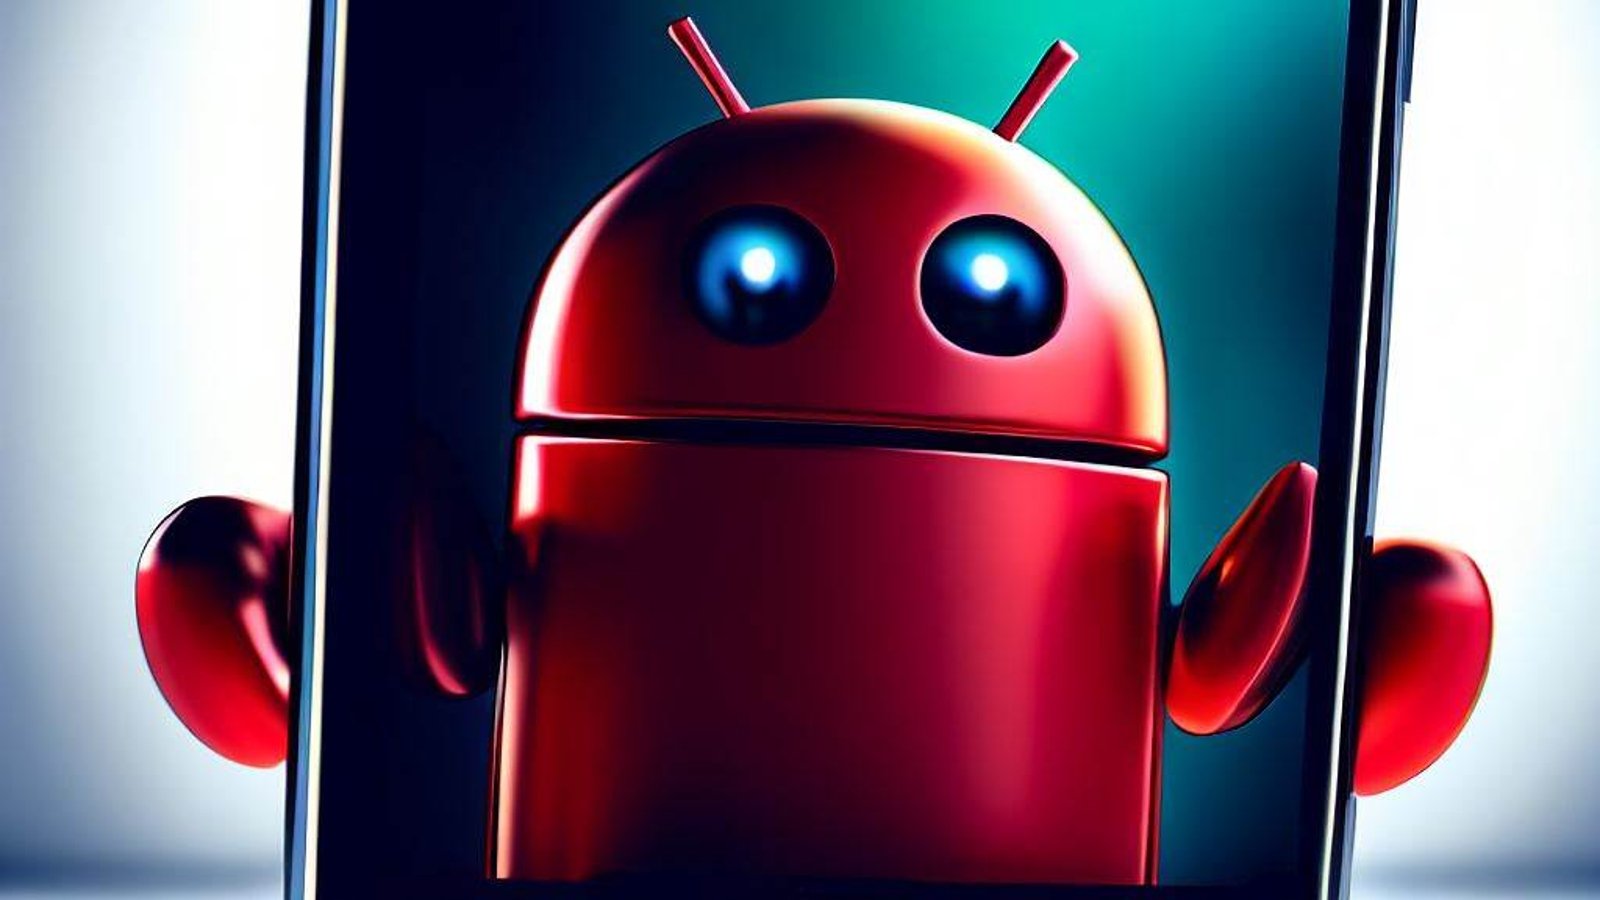 Android apps with spyware installed 421 million times from Google Play